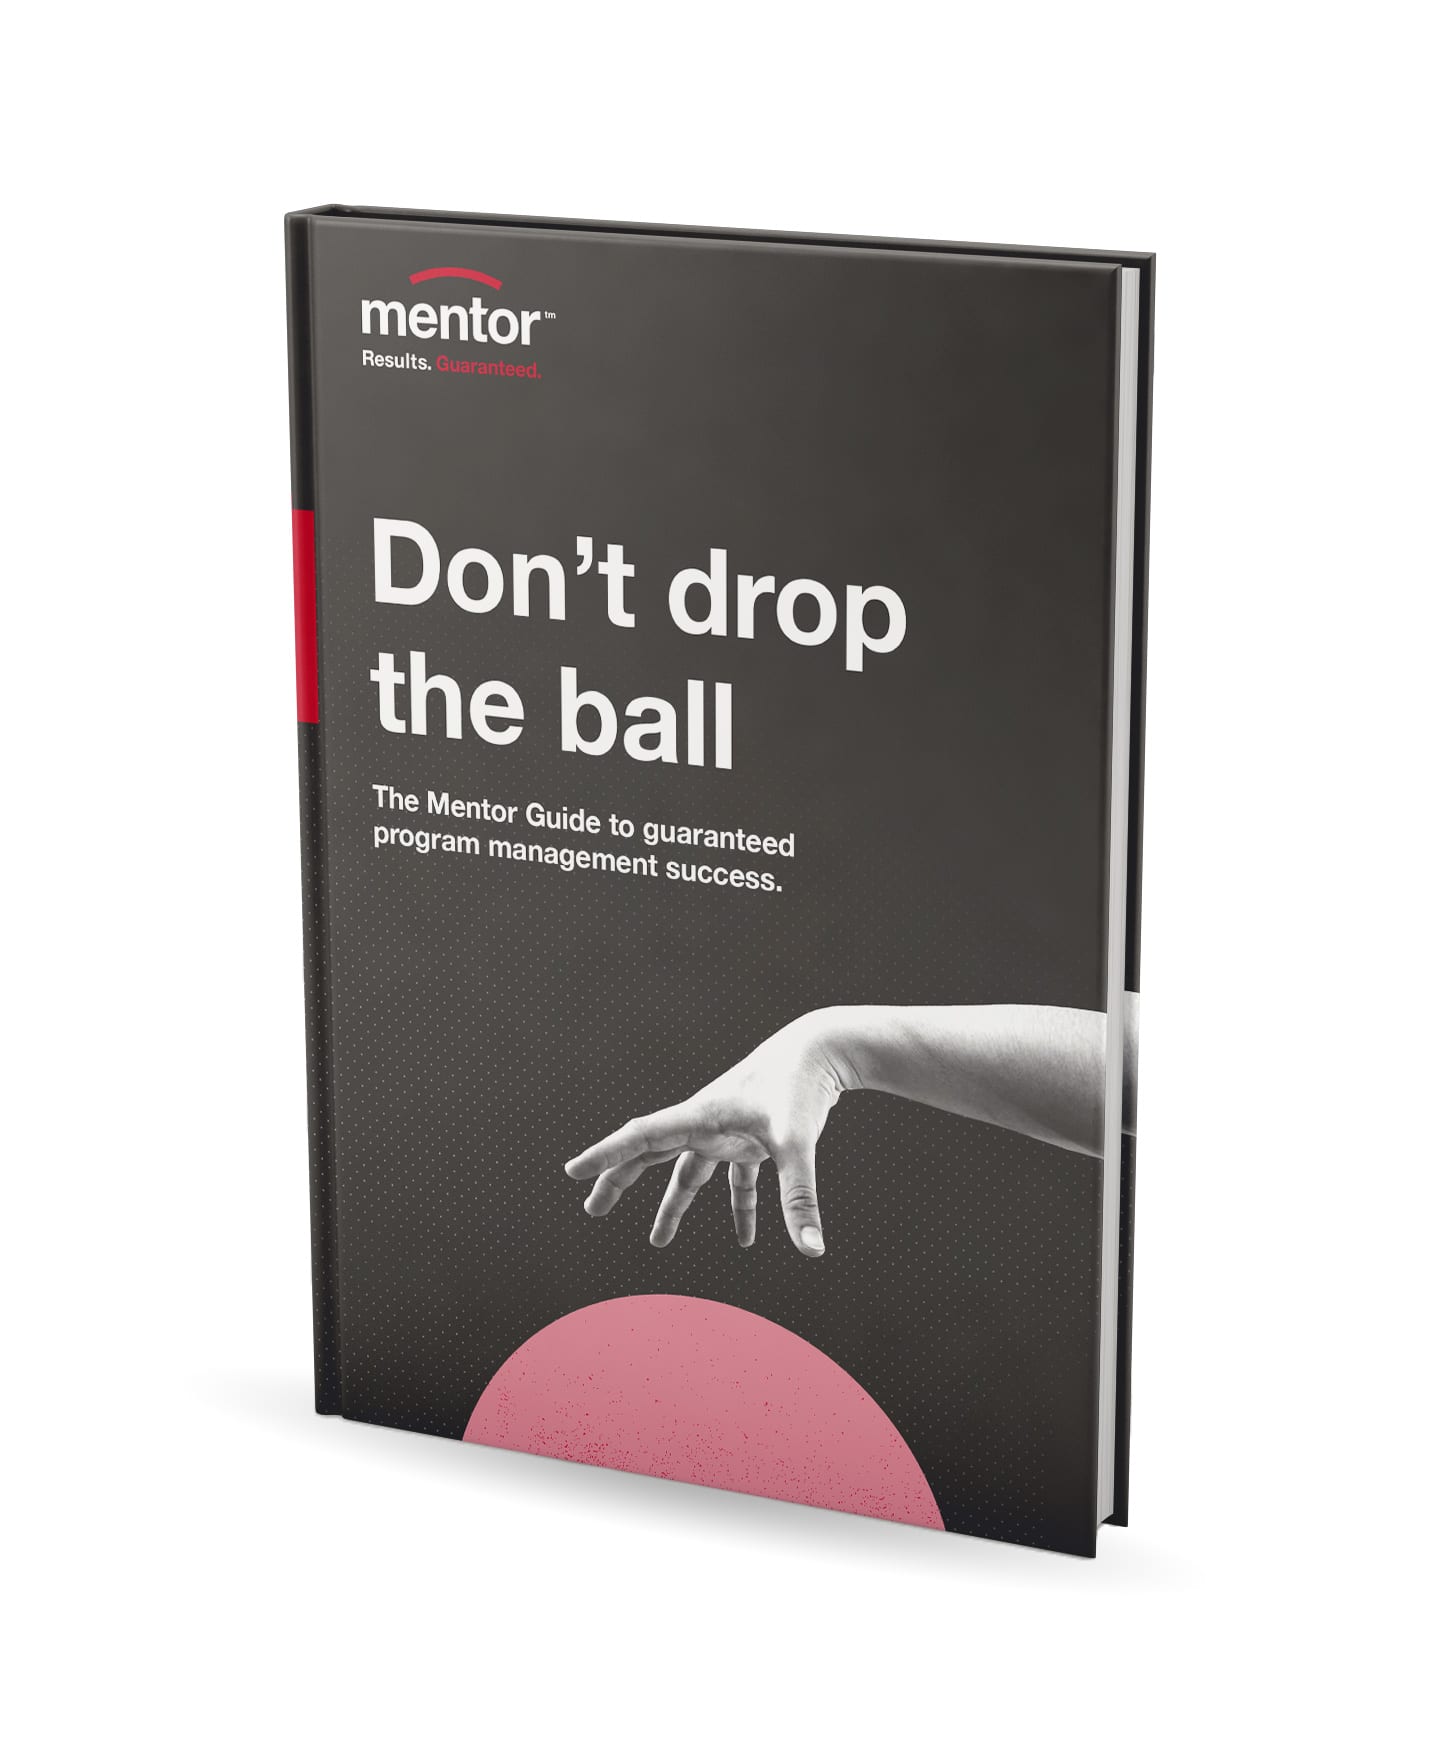 Don't drop the ball book